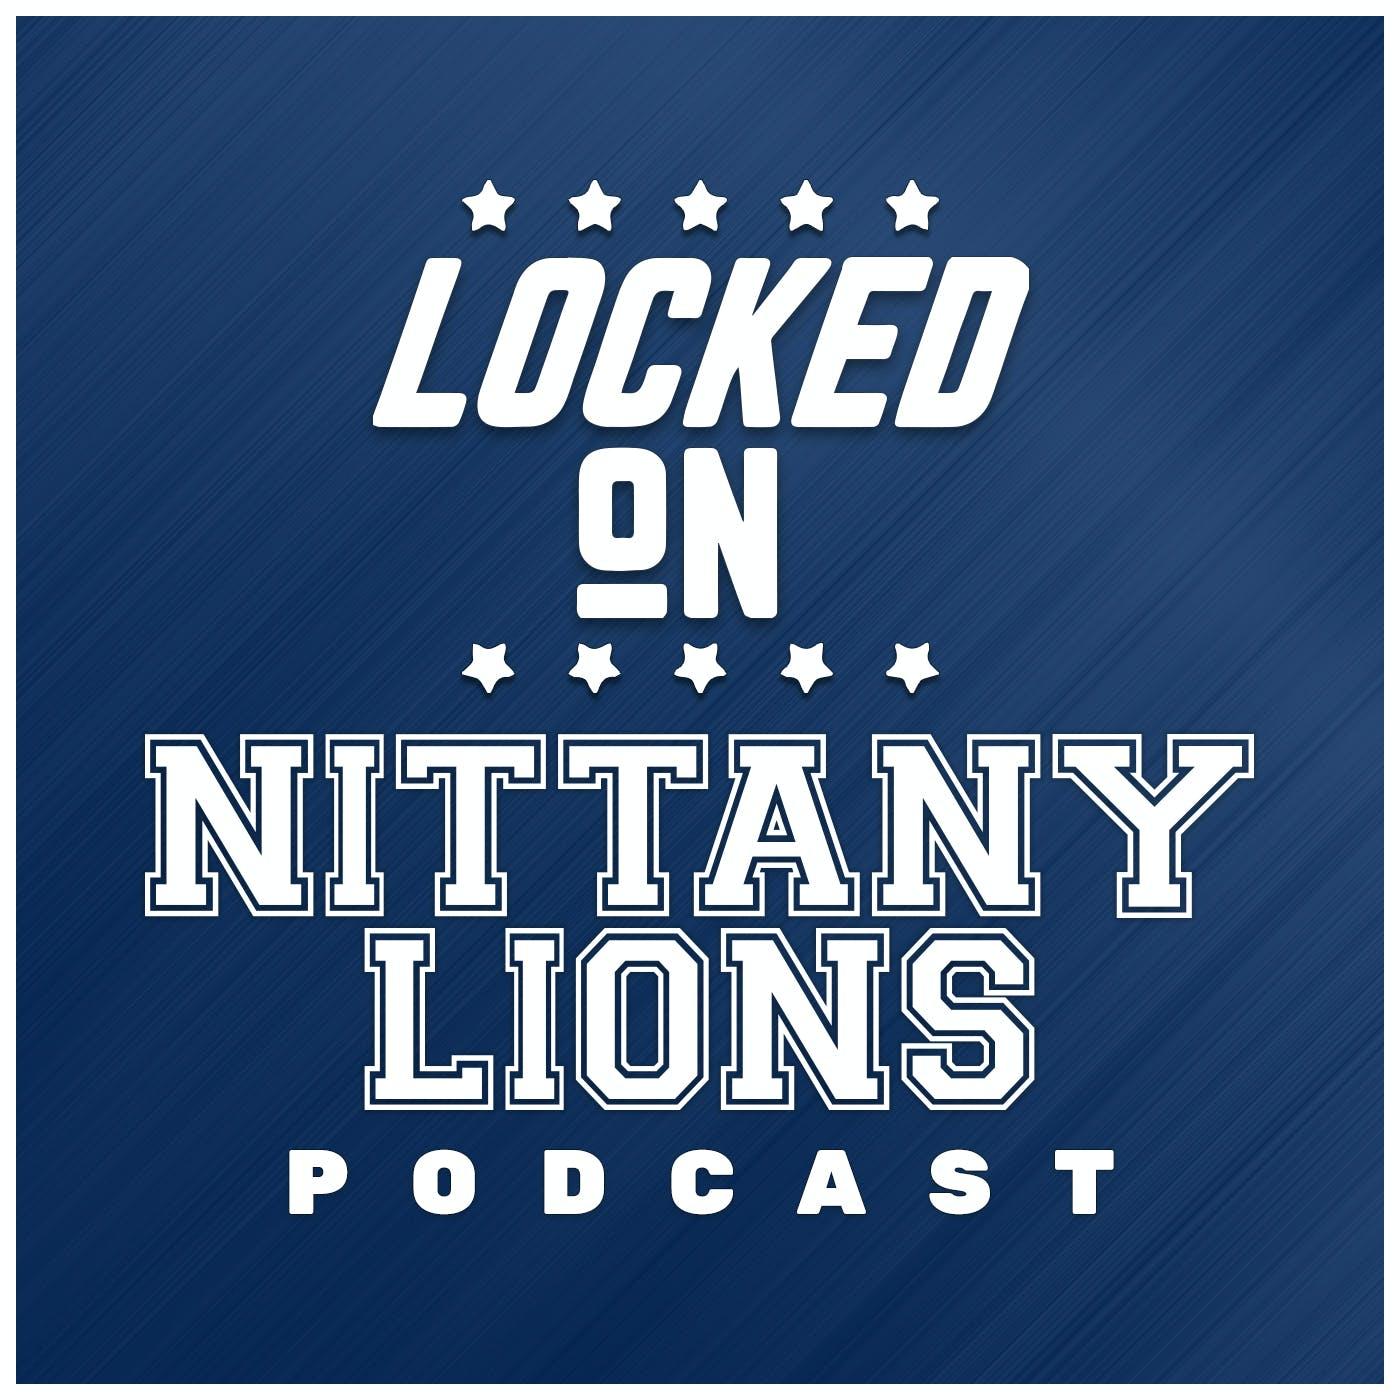 Show poster of Locked On Nittany Lions - Daily Podcast On Penn State Nittany Lions Football & Basketball